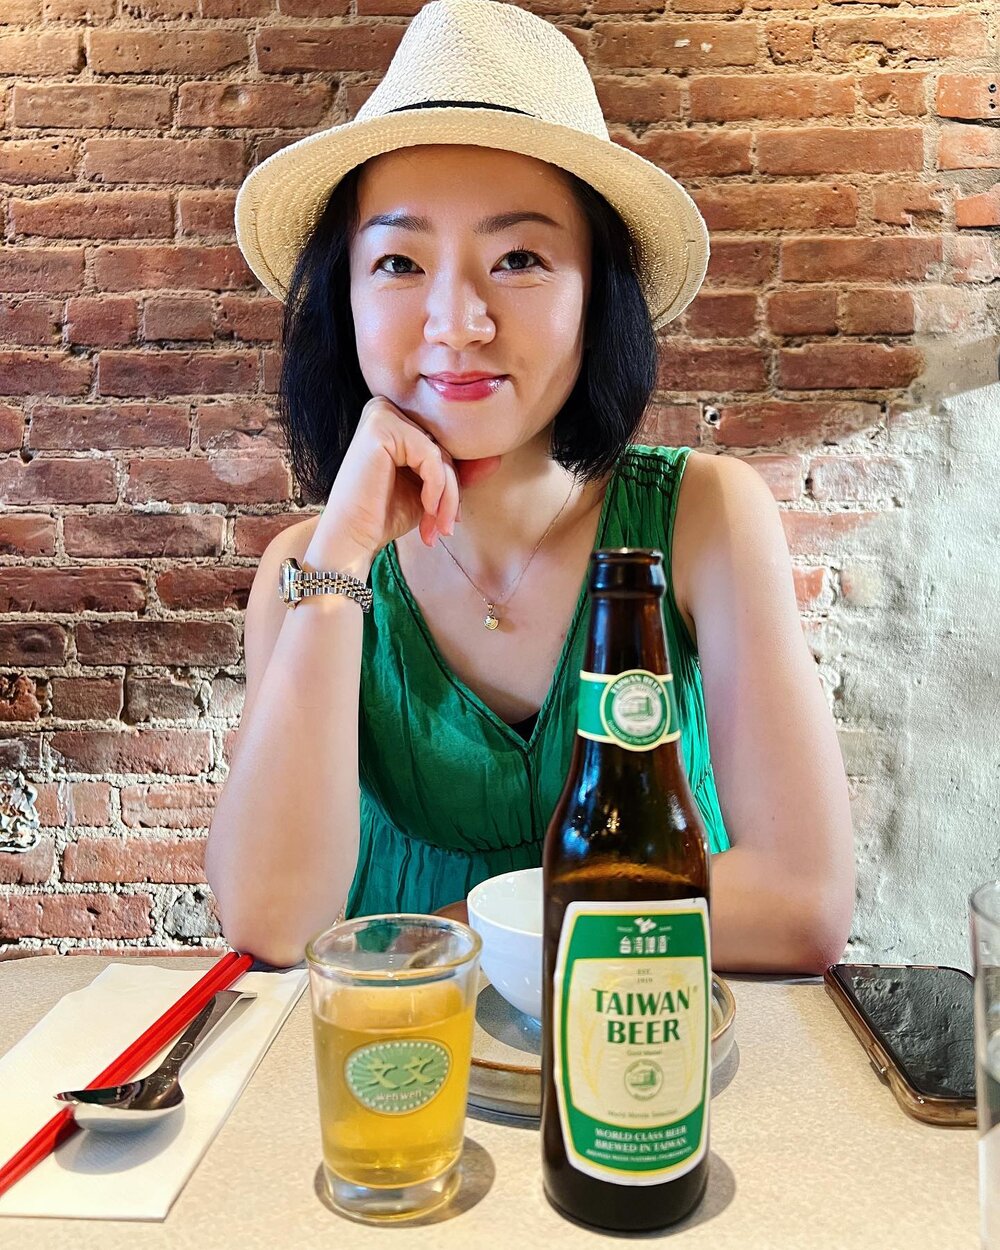 On #tastytuesday, I&rsquo;m sipping beer instead of wine. 🍺​
&nbsp;​
Introducing @taiwanbeer.official, one of the best-selling beers in Taiwan. ​
&nbsp;​
First brewed in 1919, Taiwan beer is made with barley malt, hops and Ponlai Rice (蓬萊米), a local